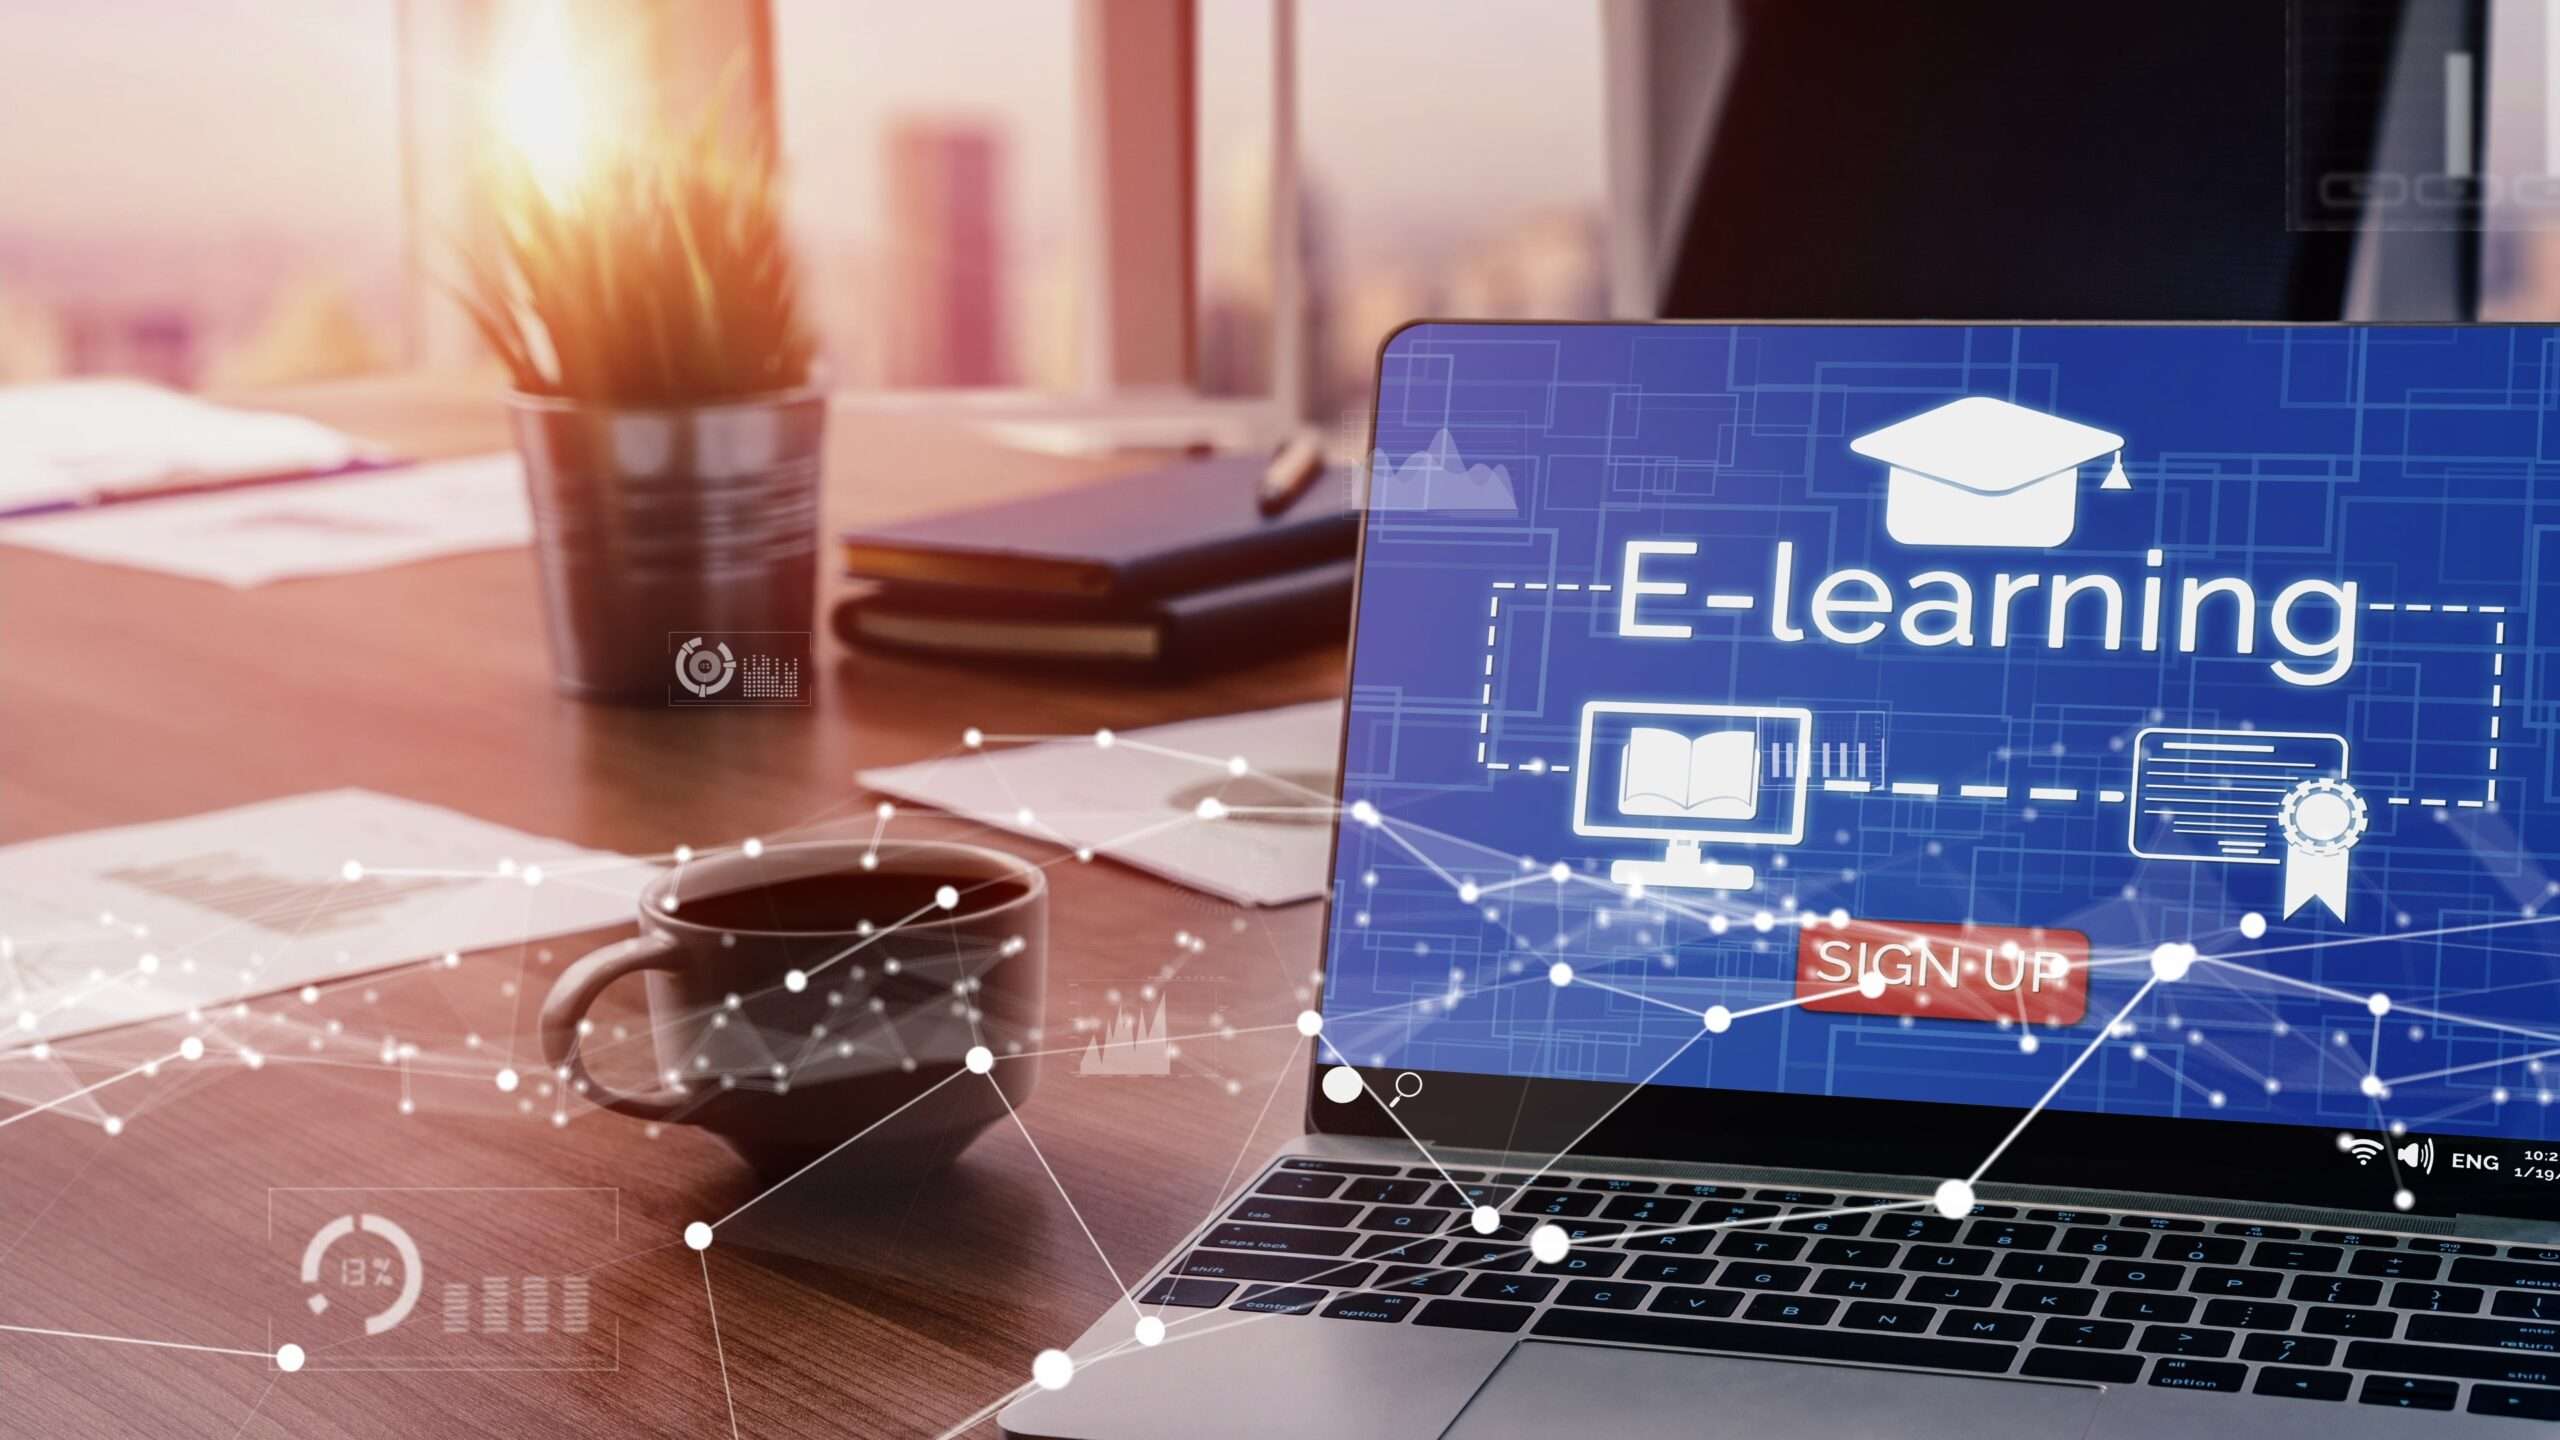 E-learning and Online Education for Student and University conceptual . Graphic interface showing technology of digital training course for people to do remote learning from anywhere.